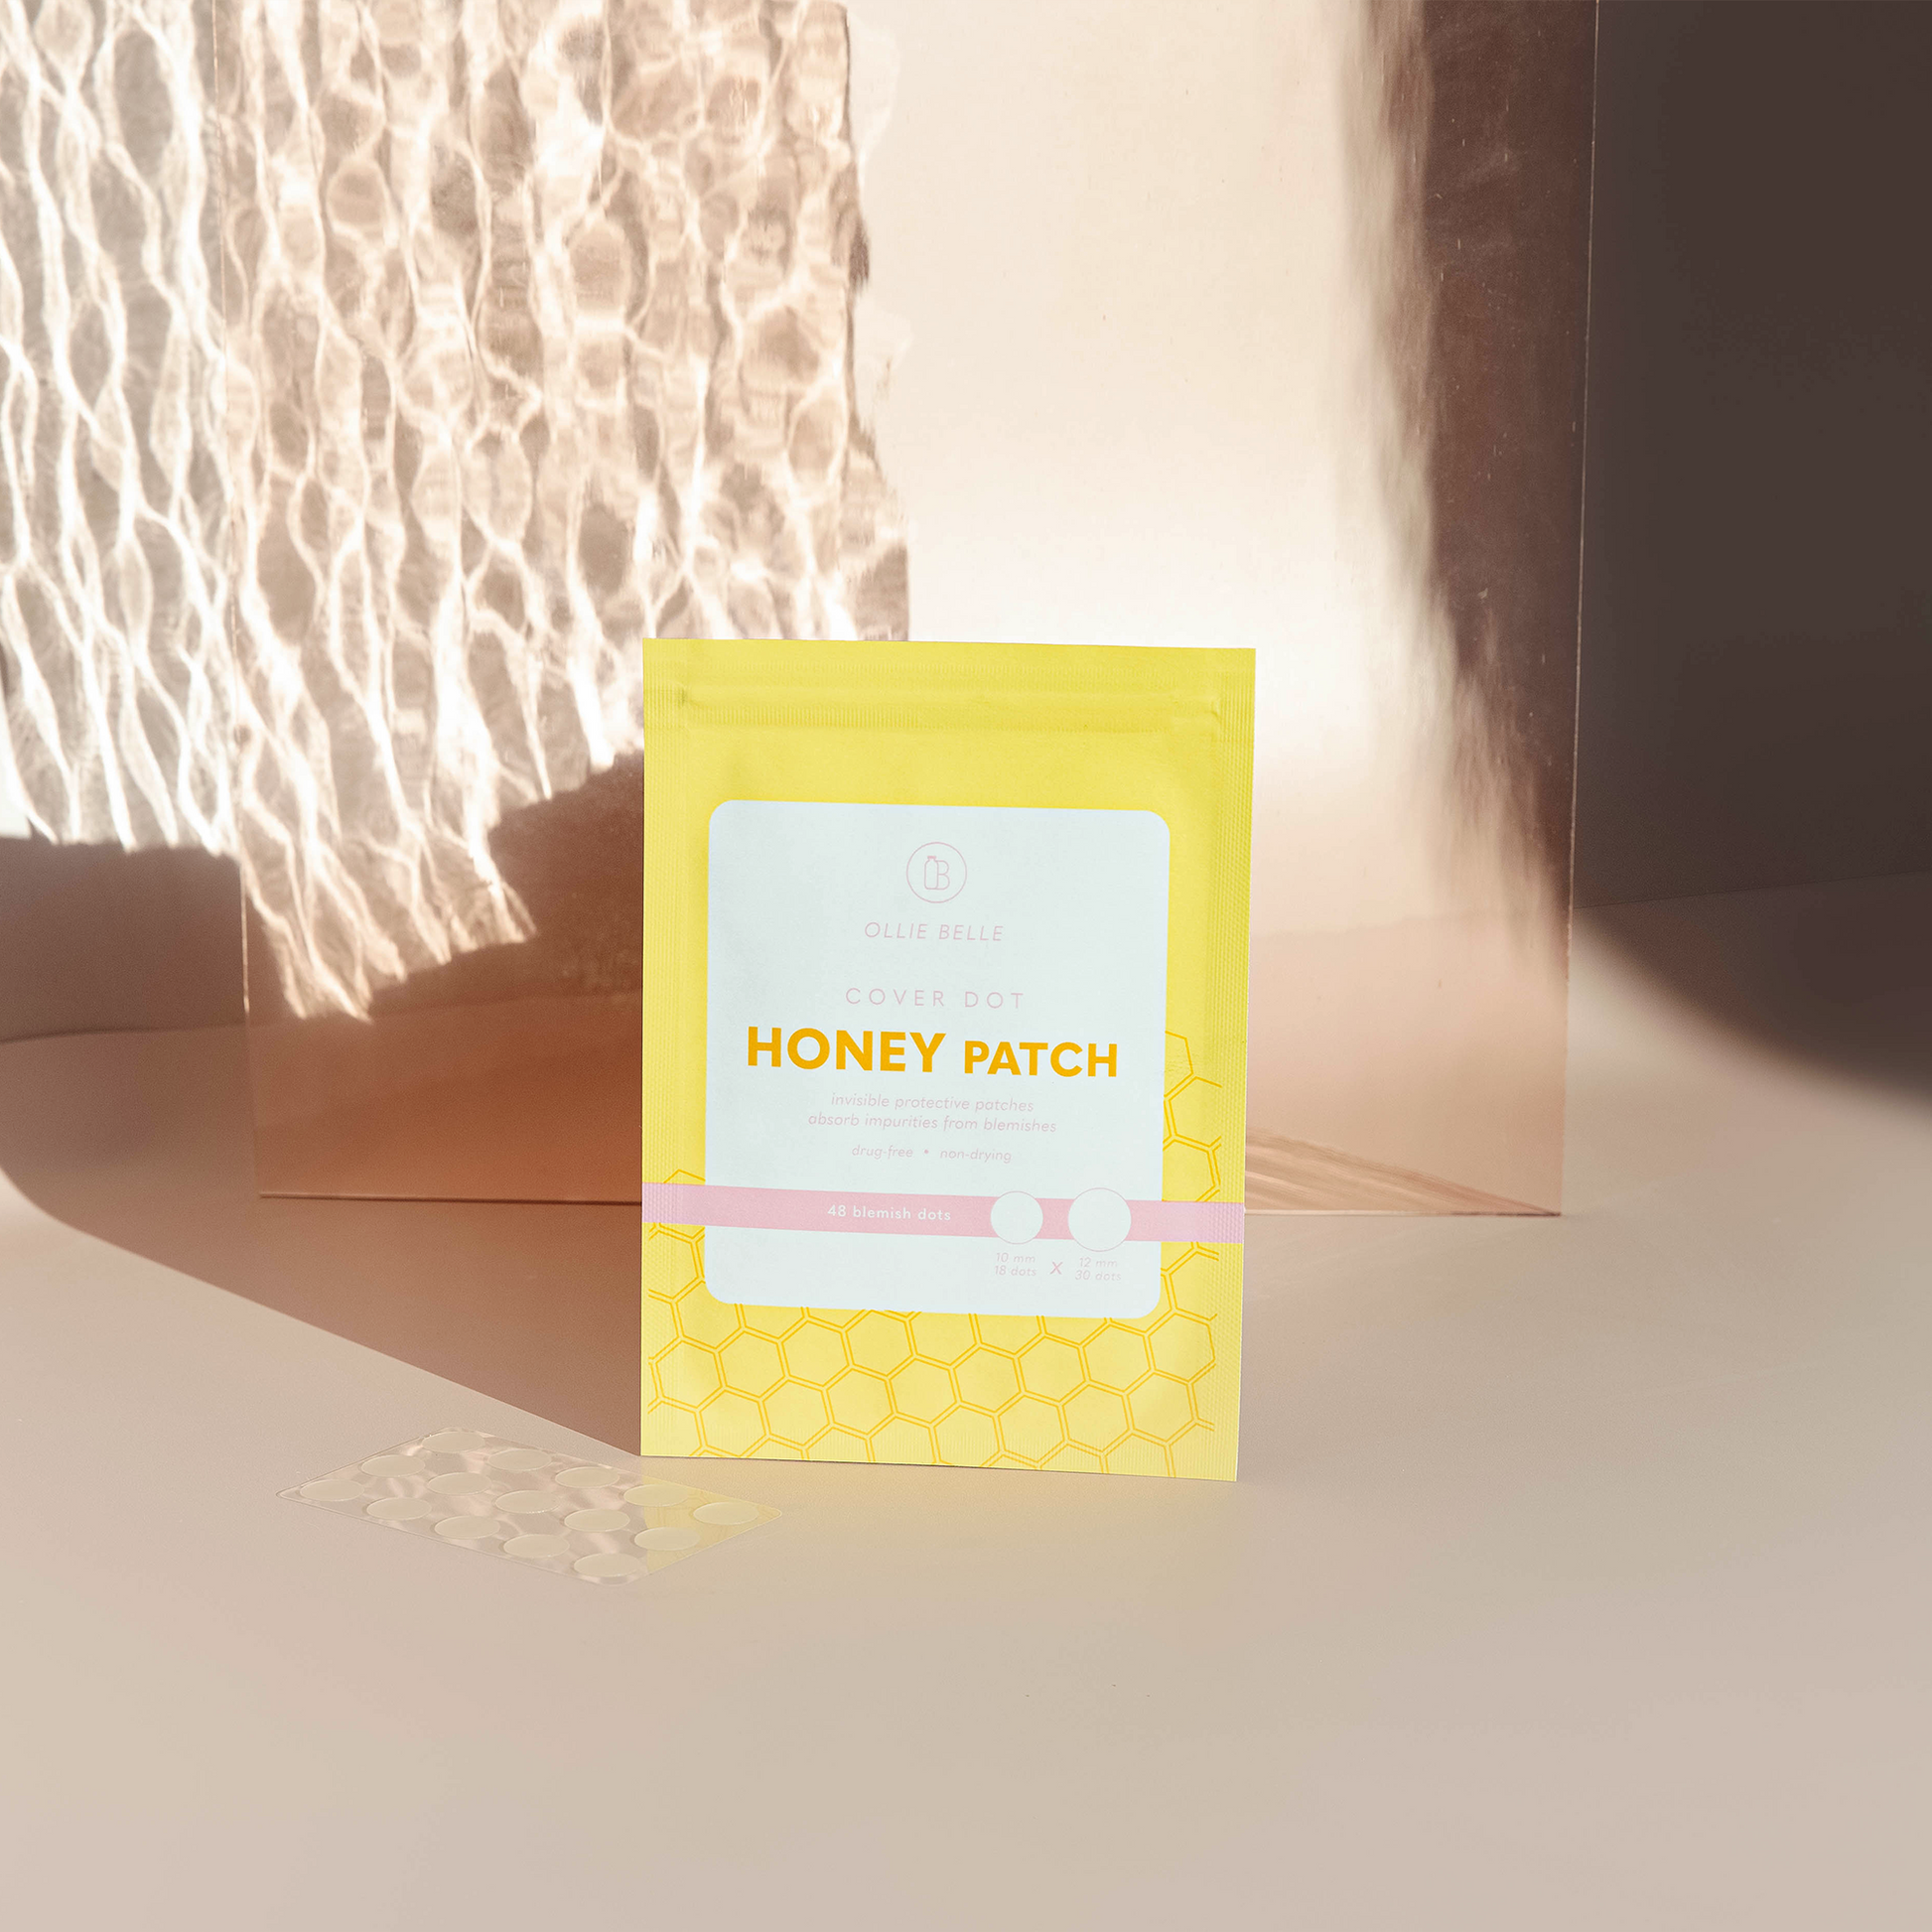 Cover Dot Honey Patch 48 Hydrocolloid Acne Patches Infused with Honey 2 Sizes 10mm and 12mm Lifestyle Image